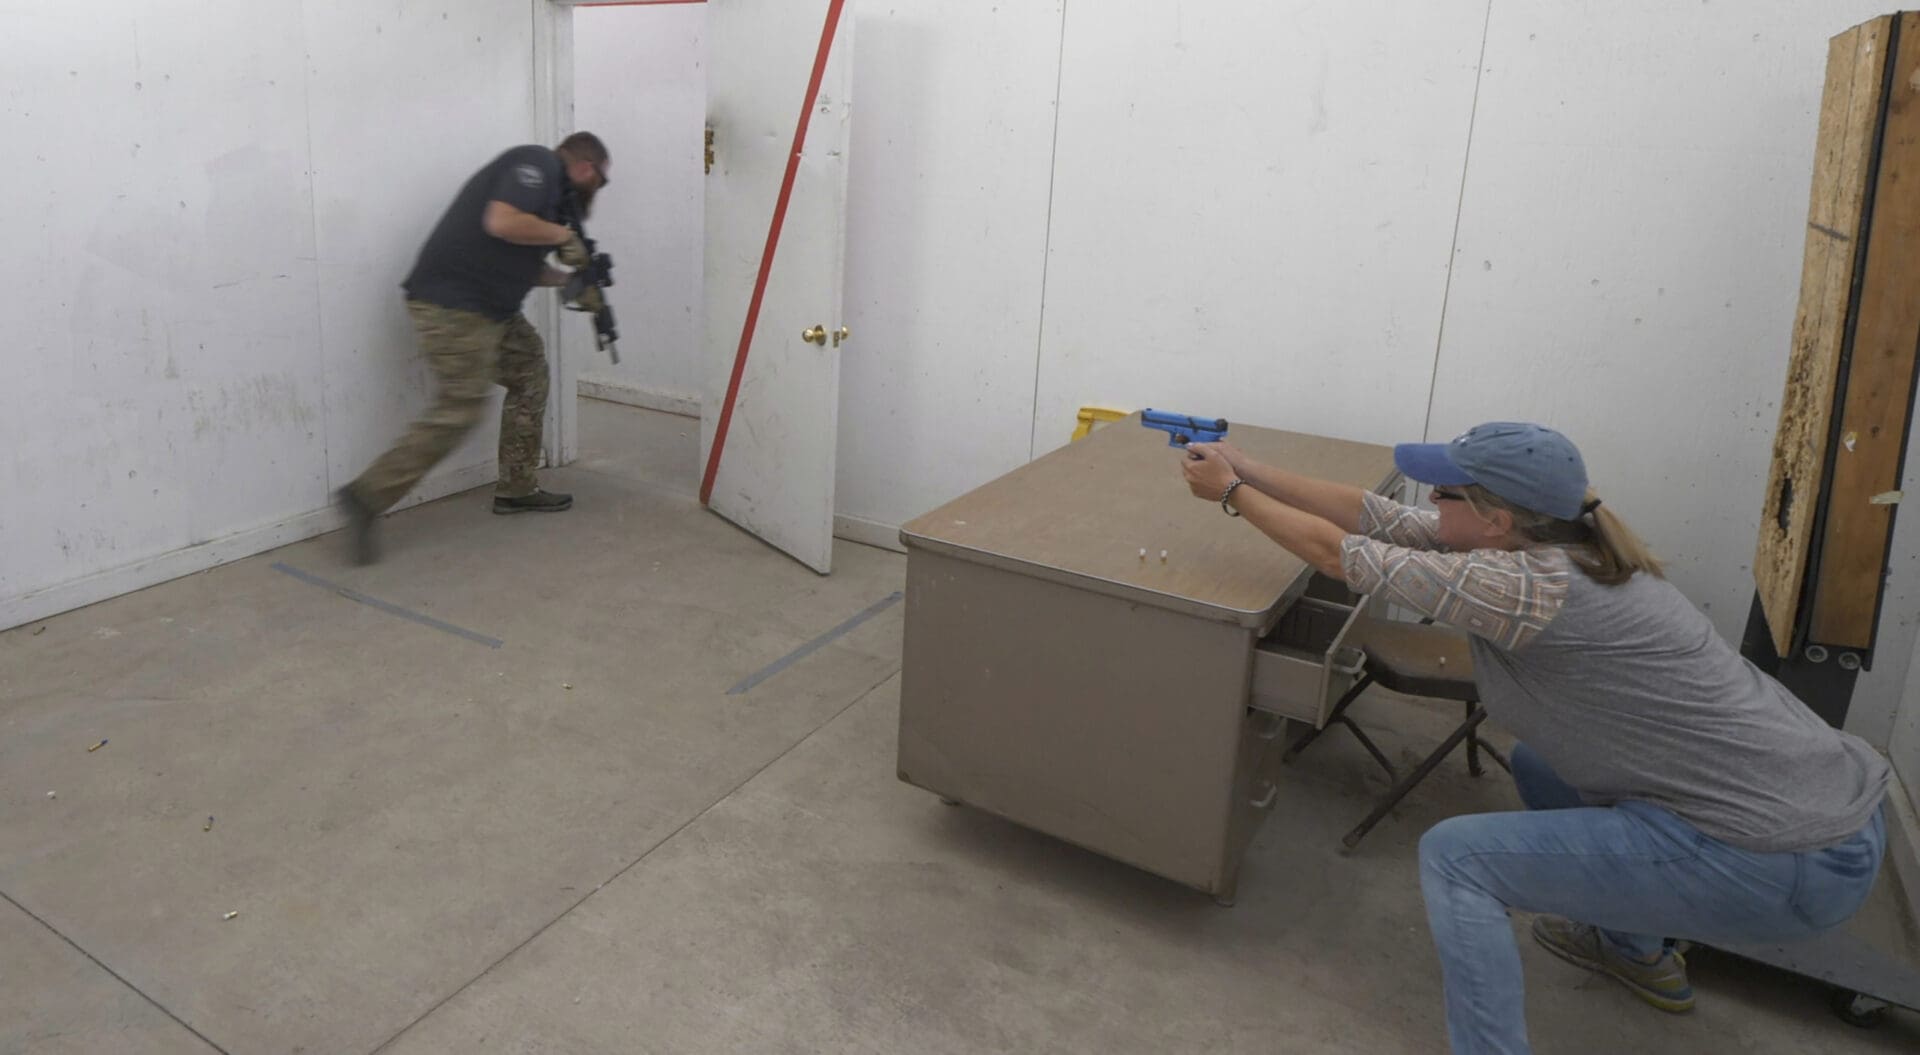 Teacher Training Shooting armed concealed carry